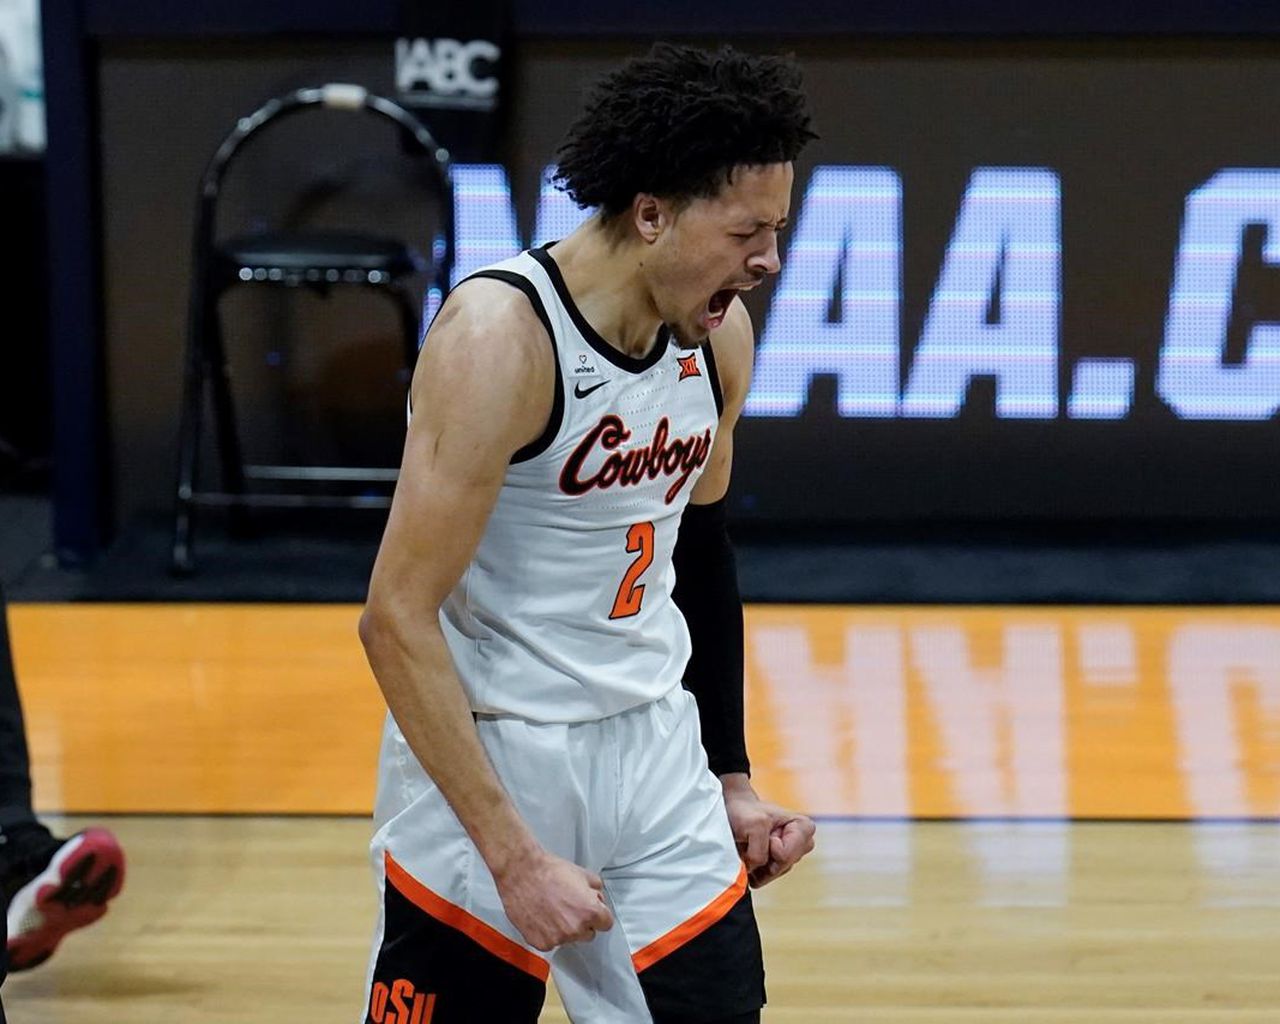 NBA likely next stop for Oklahoma State freshman Cunningham